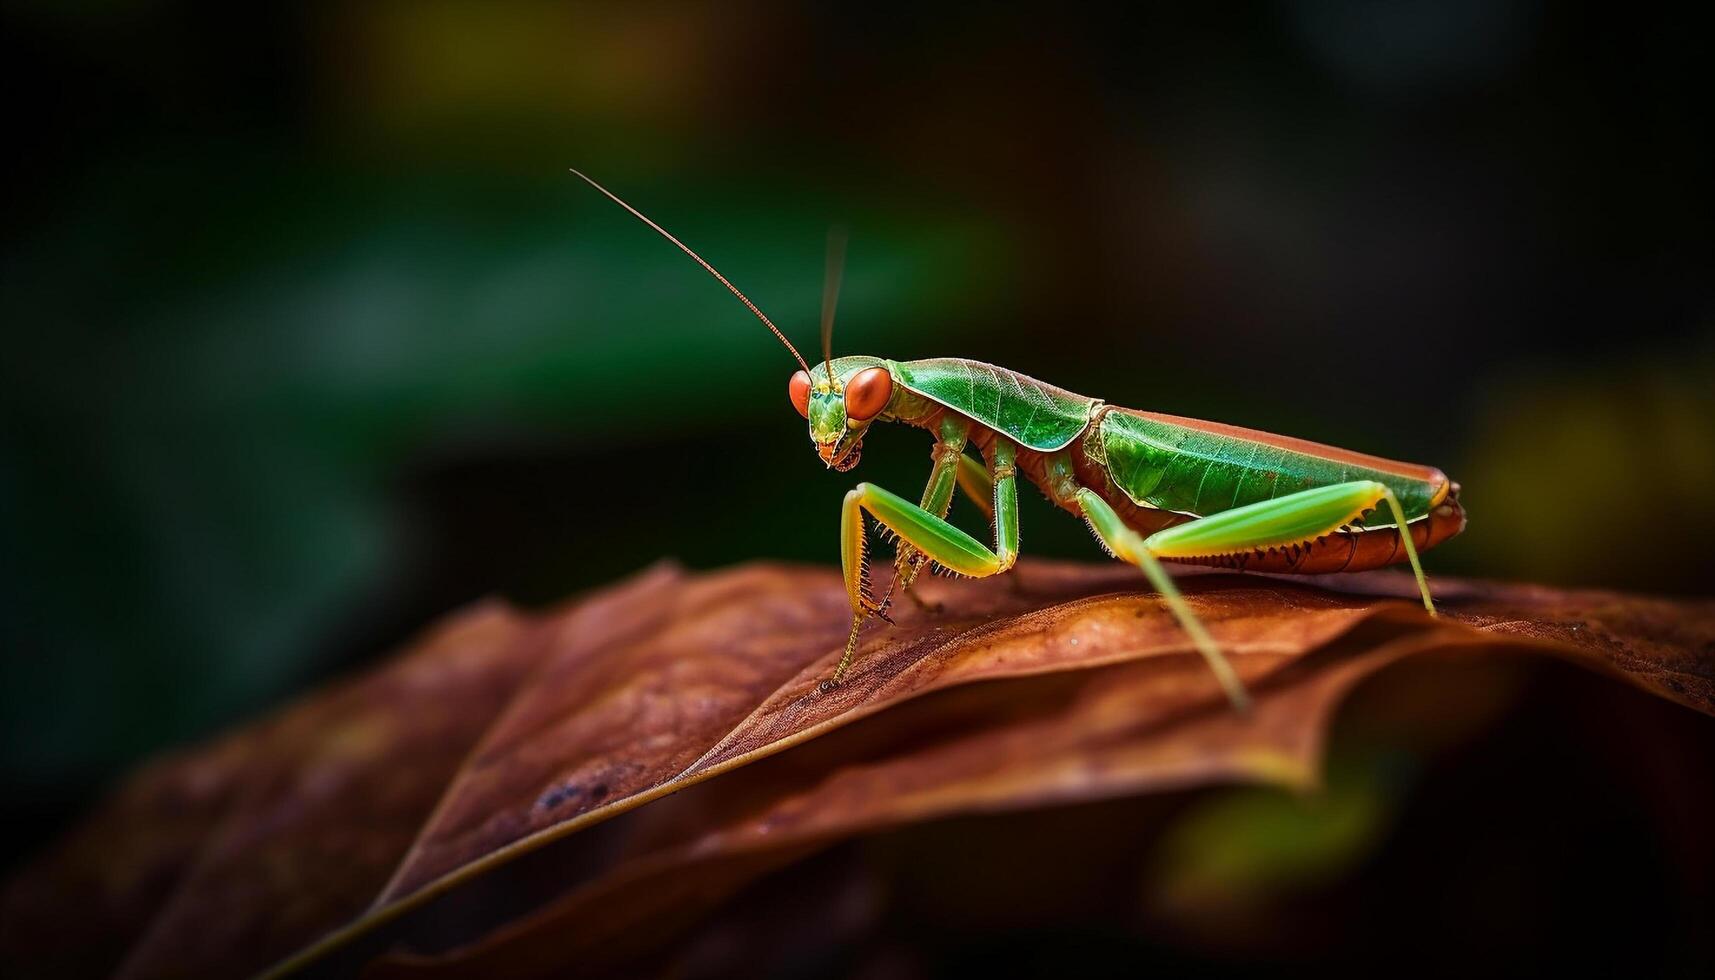 Praying mantis sitting on green leaf, looking generated by AI photo